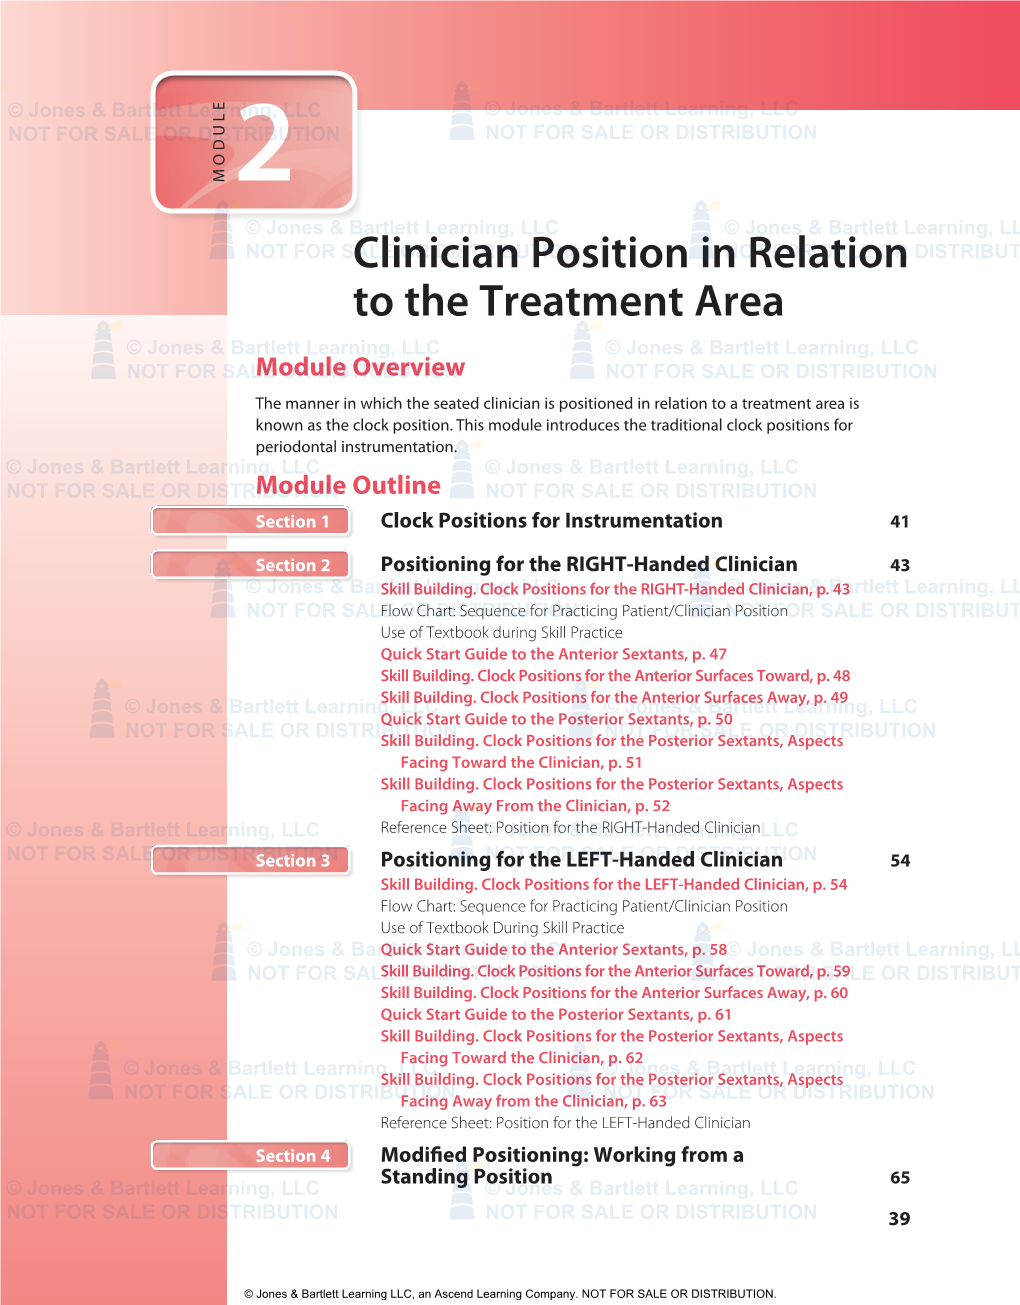 Clinician Position in Relation to the Treatment Area